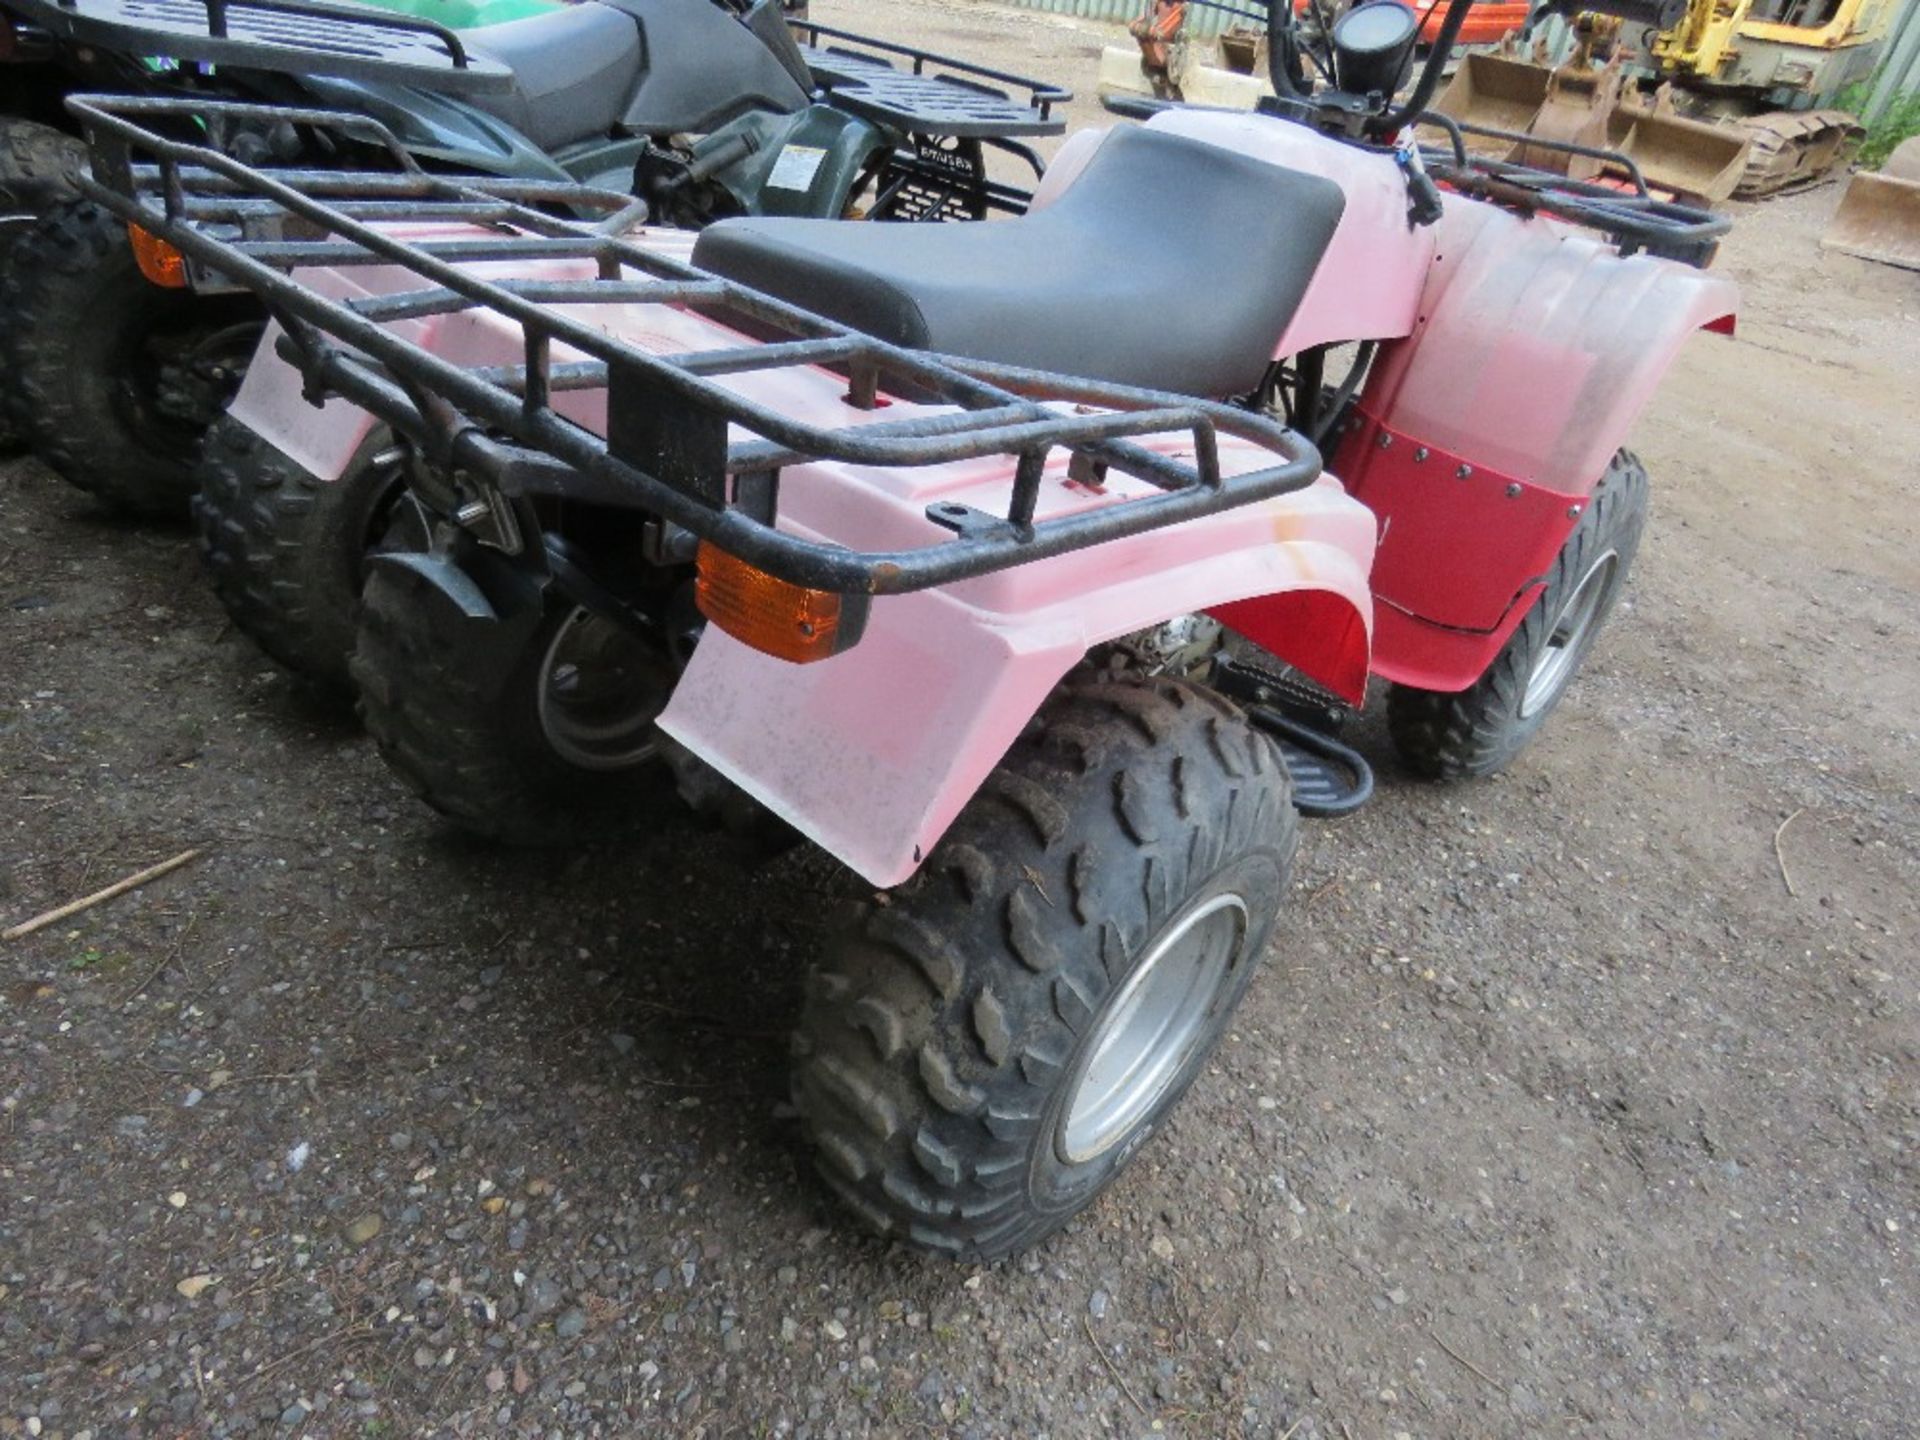 JIANSHE 2WD PETROL ENGINED QUAD BIKE, CONDITION UNKNOWN, SOLD AS NON RUNNER. - Image 4 of 7